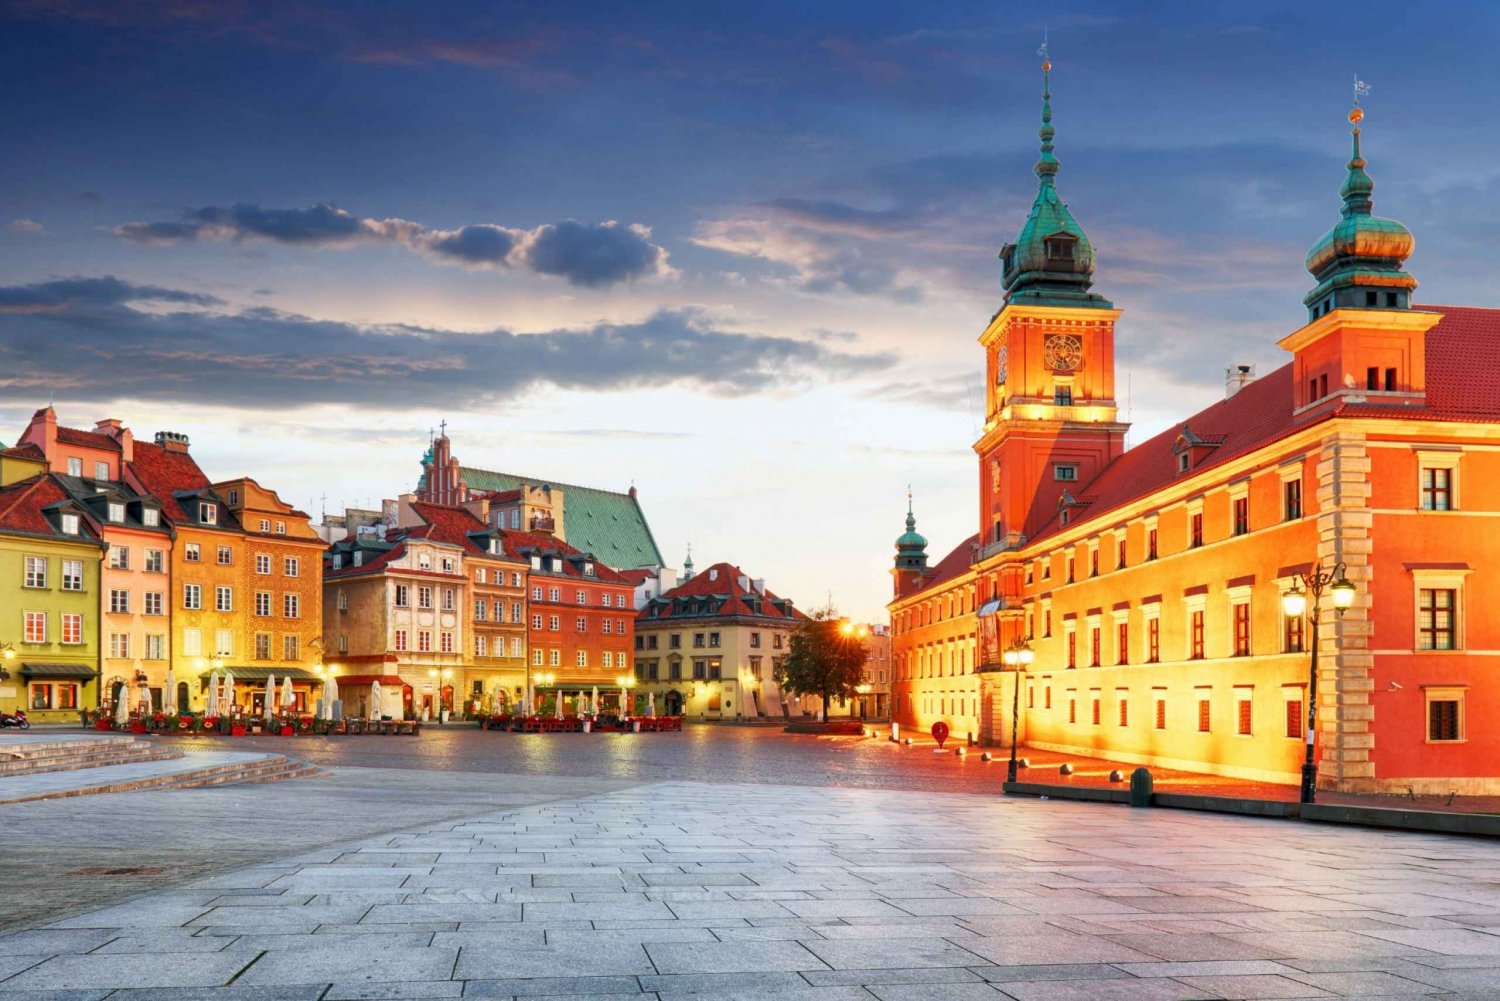 Warsaw: City Introduction in-App Guide & Audio